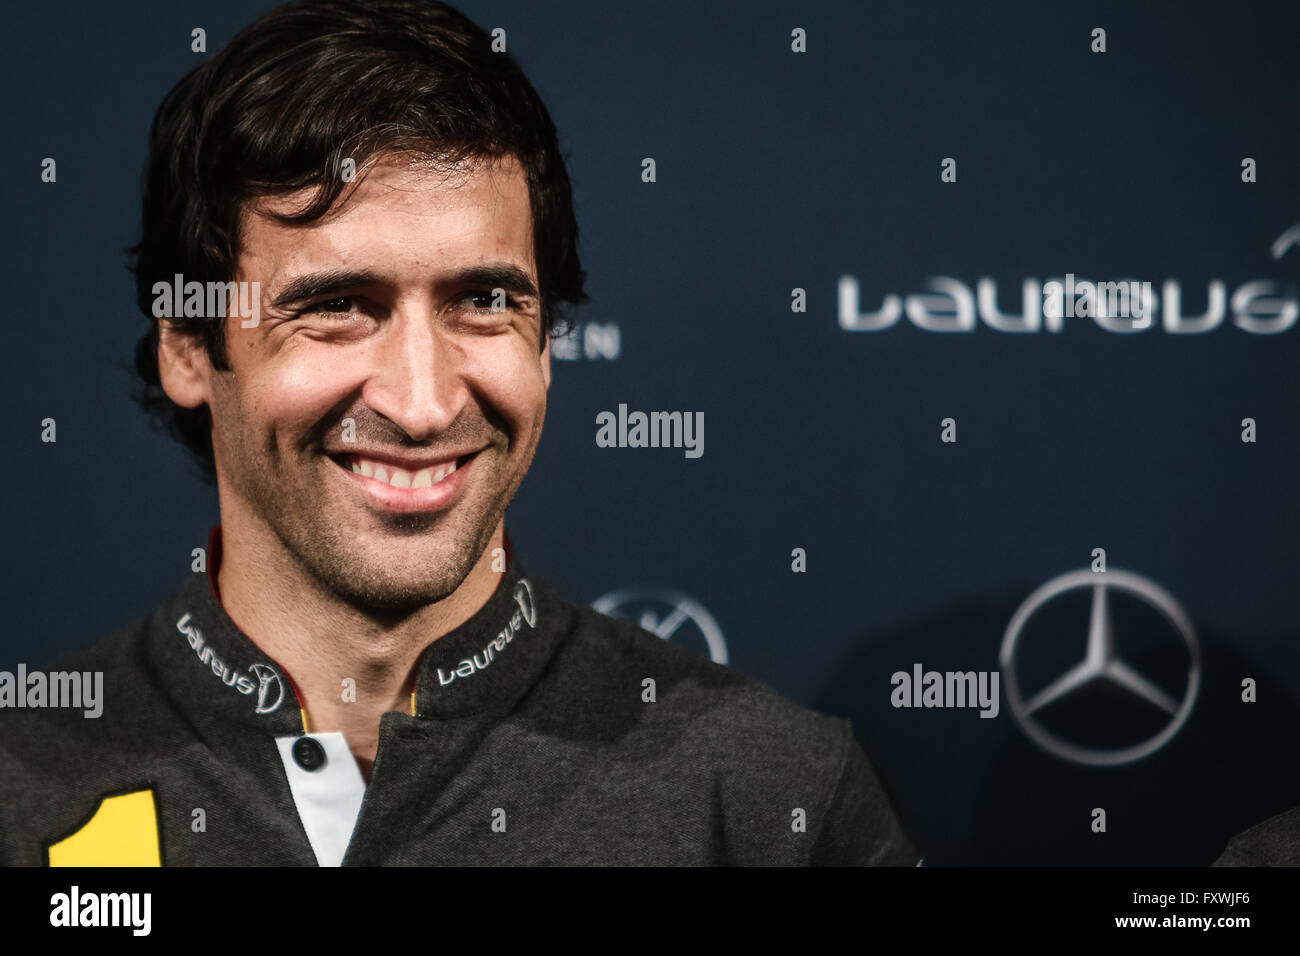 Berlin, Germany. 18th Apr, 2016. Spain's football player Raul Gonzalez Blanco attends a press conference prior to the 17th Laureus World Sports Award ceremony in Berlin, Germany, April 18, 2016. Credit:  Zhang Fan/Xinhua/Alamy Live News Stock Photo